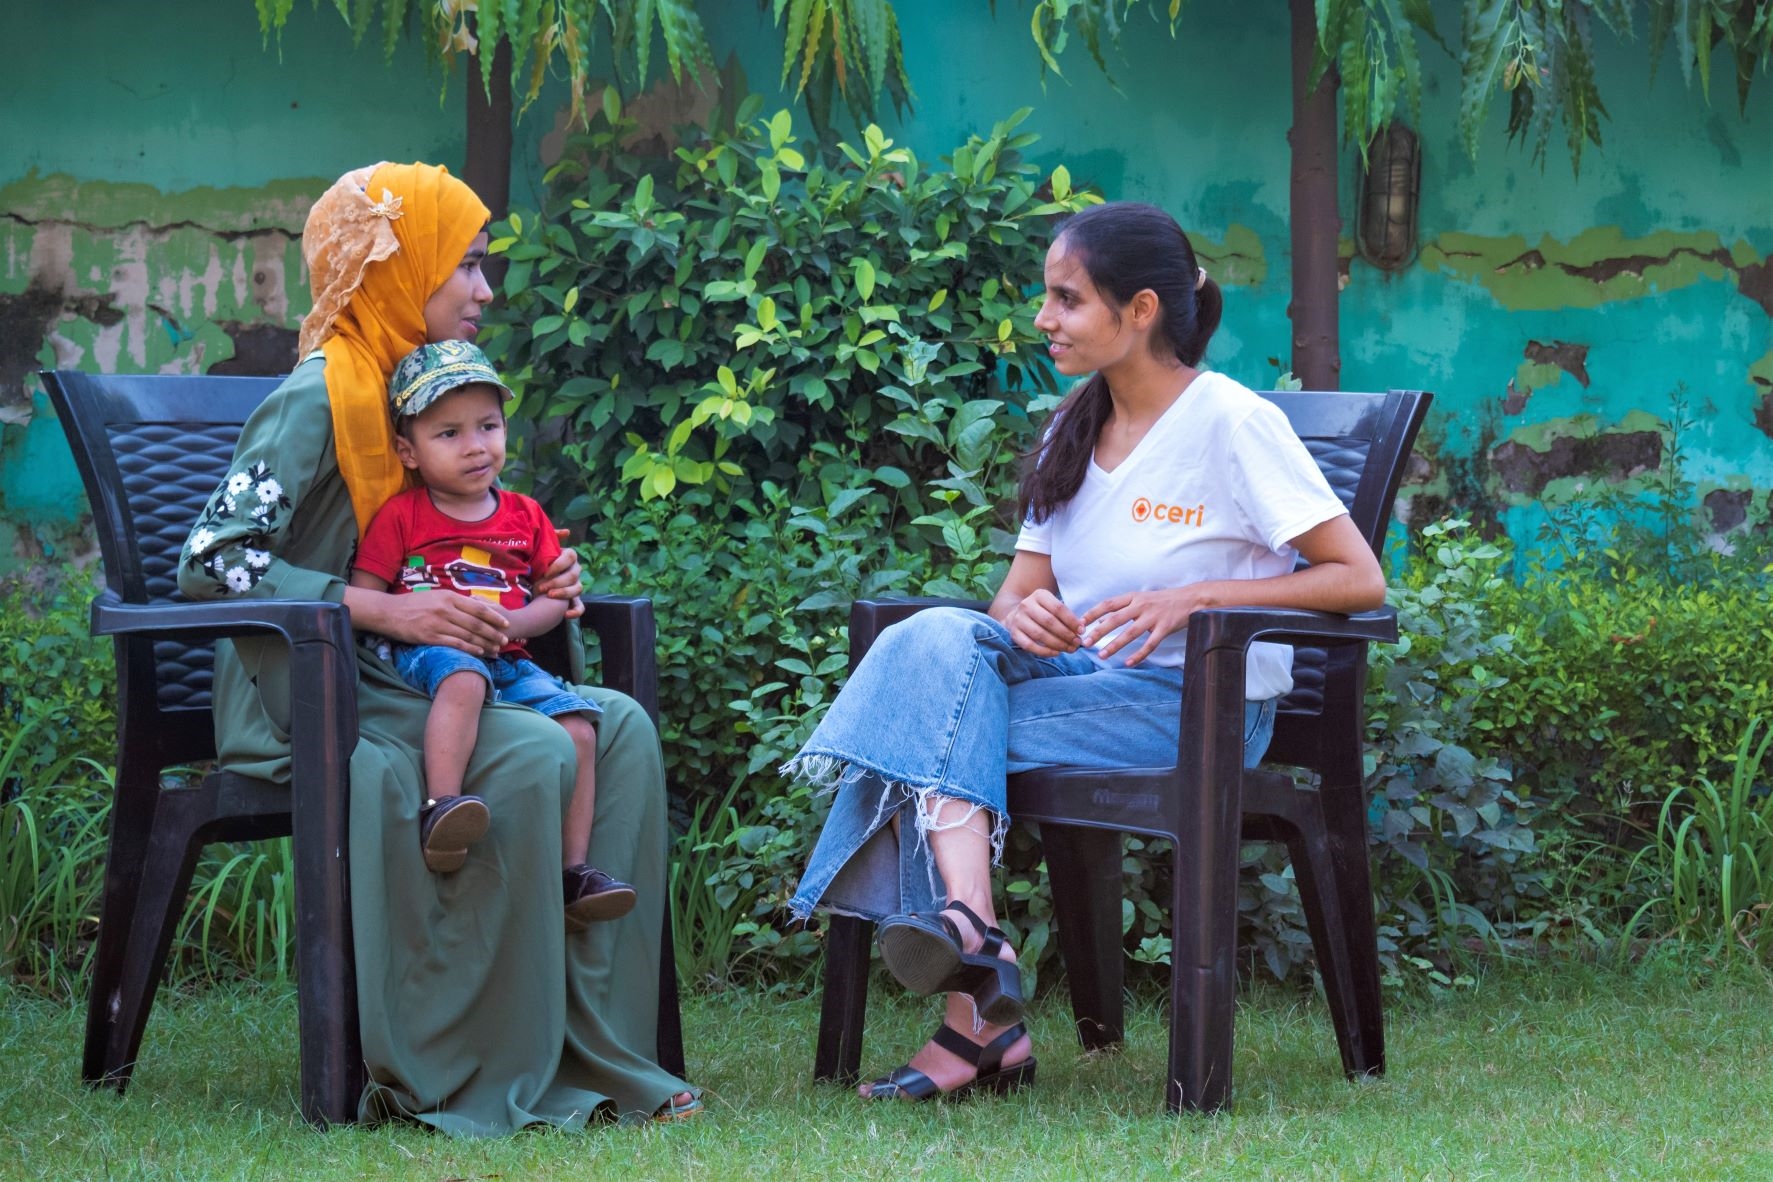 Rukhsana receiving counseling from CERI staff